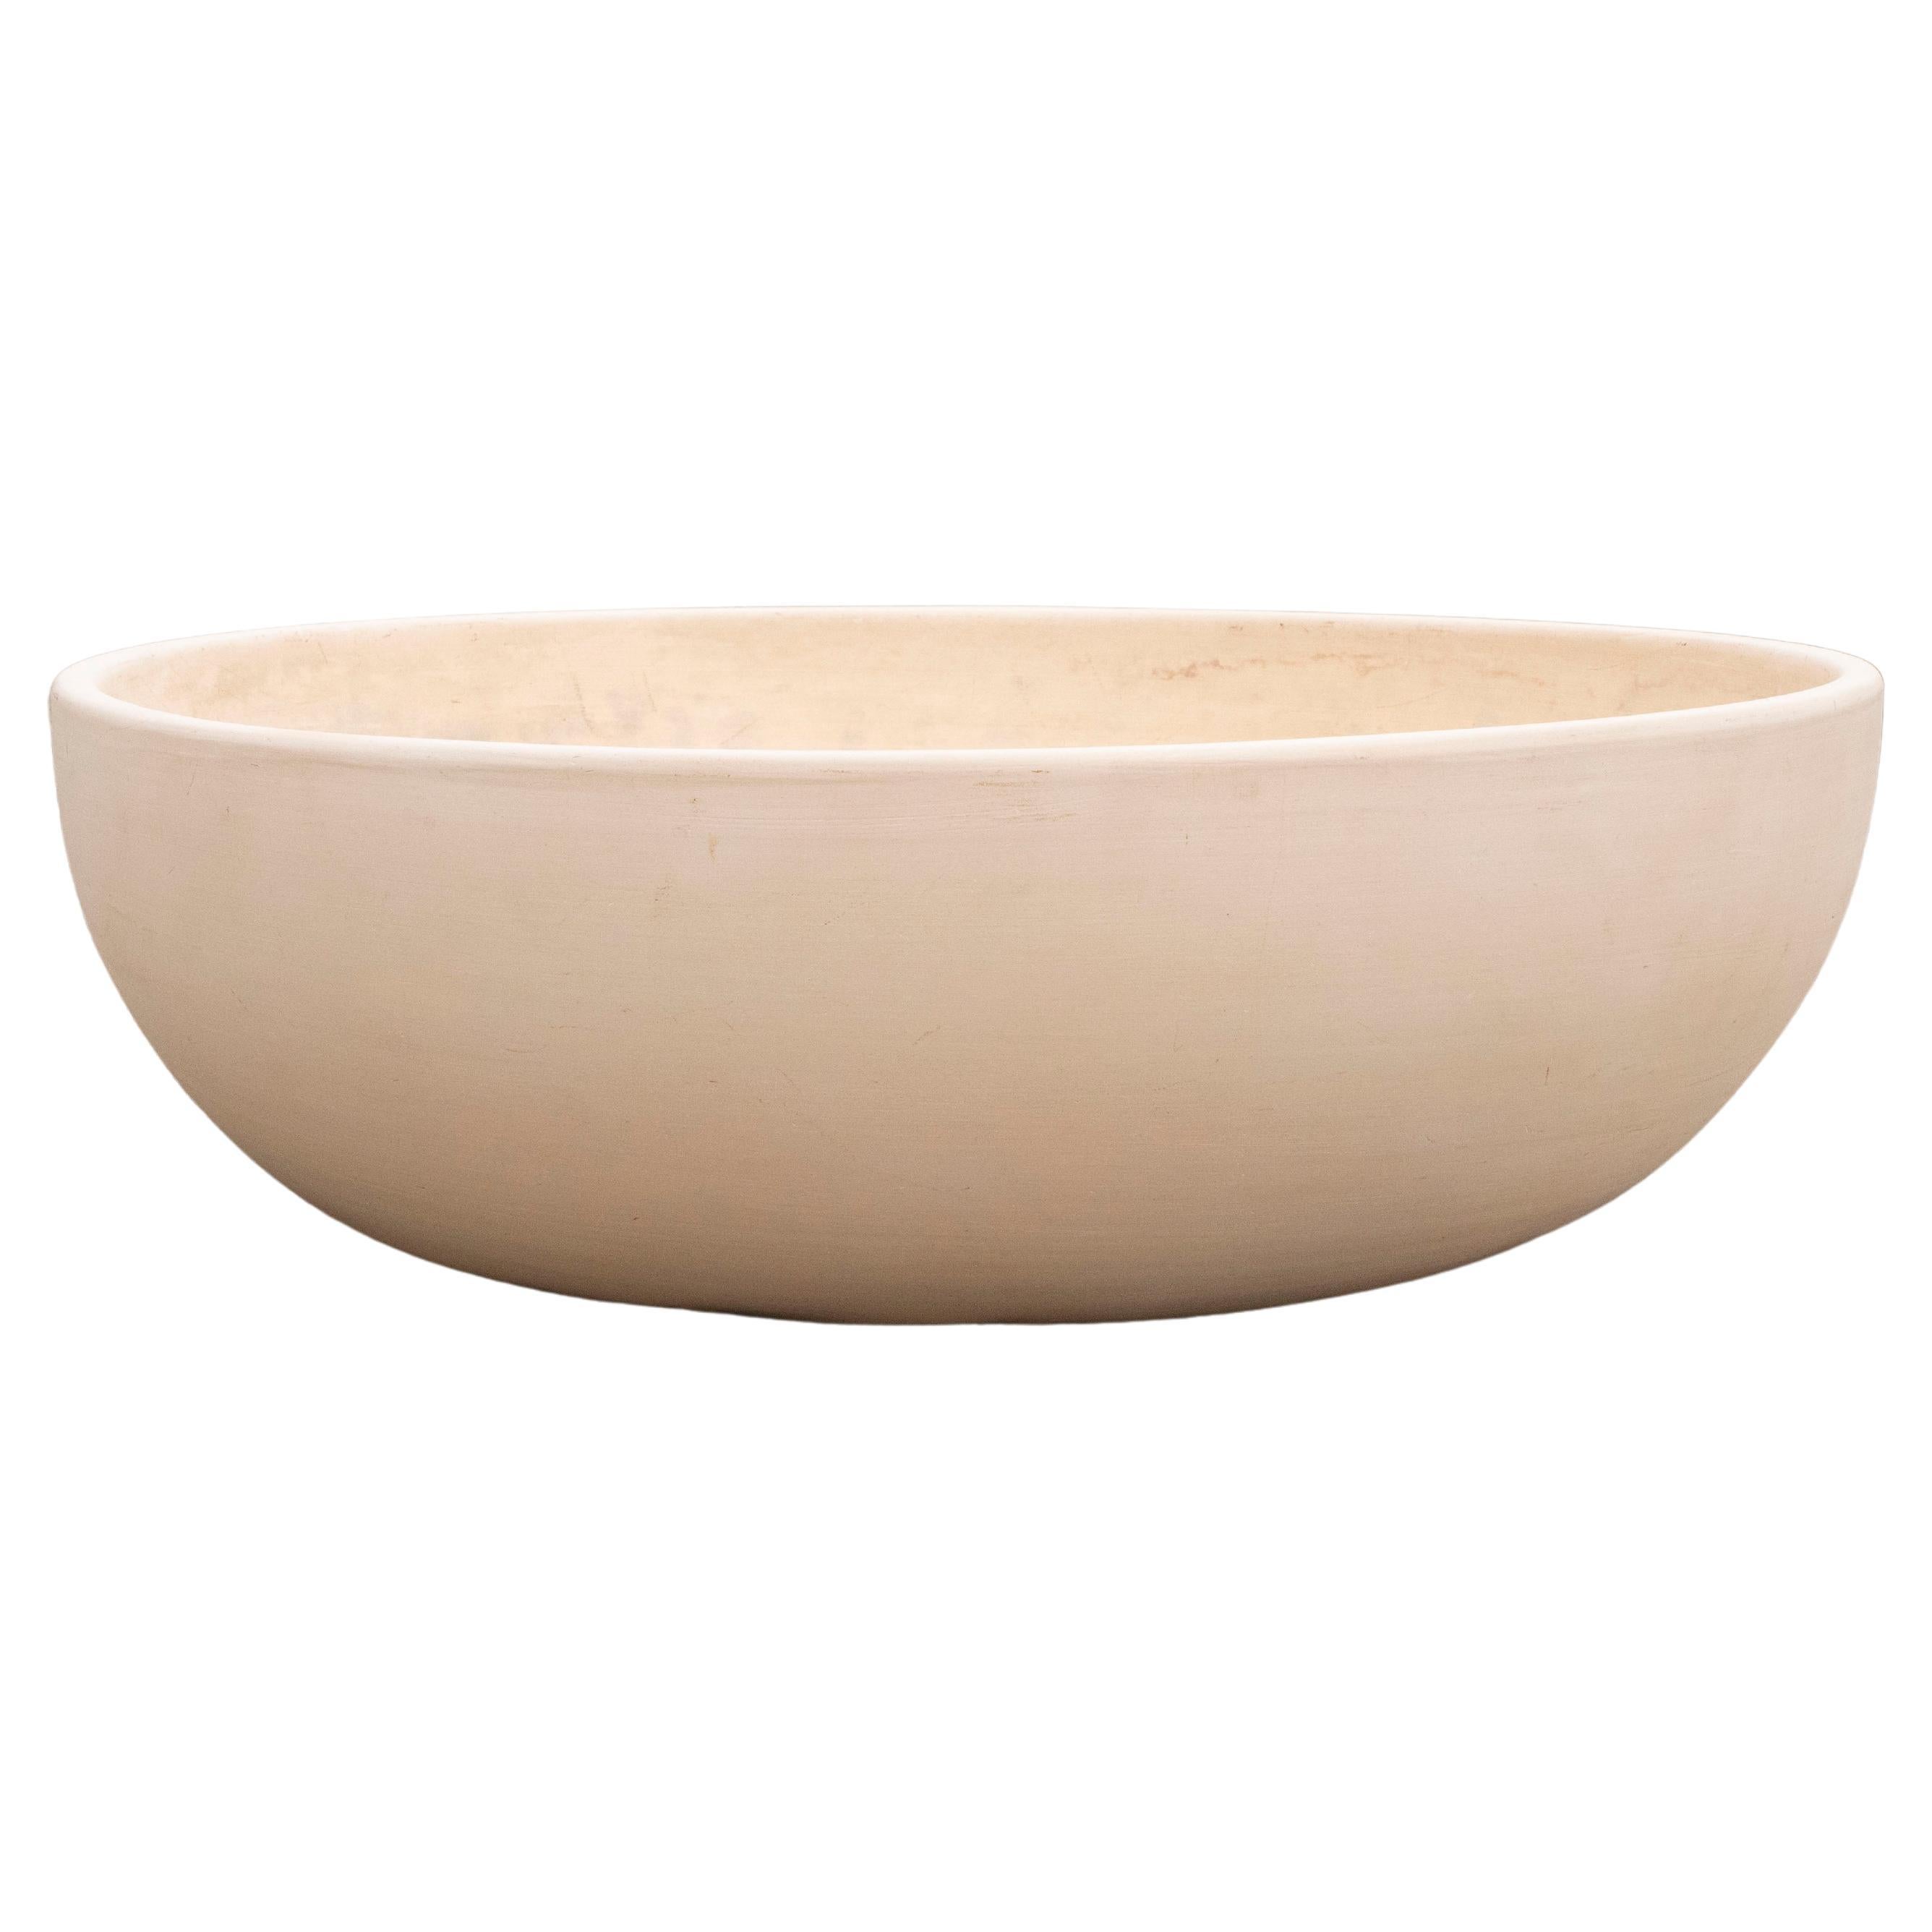 Architectural Pottery "F-09" Bowl by John Follis in Bisque